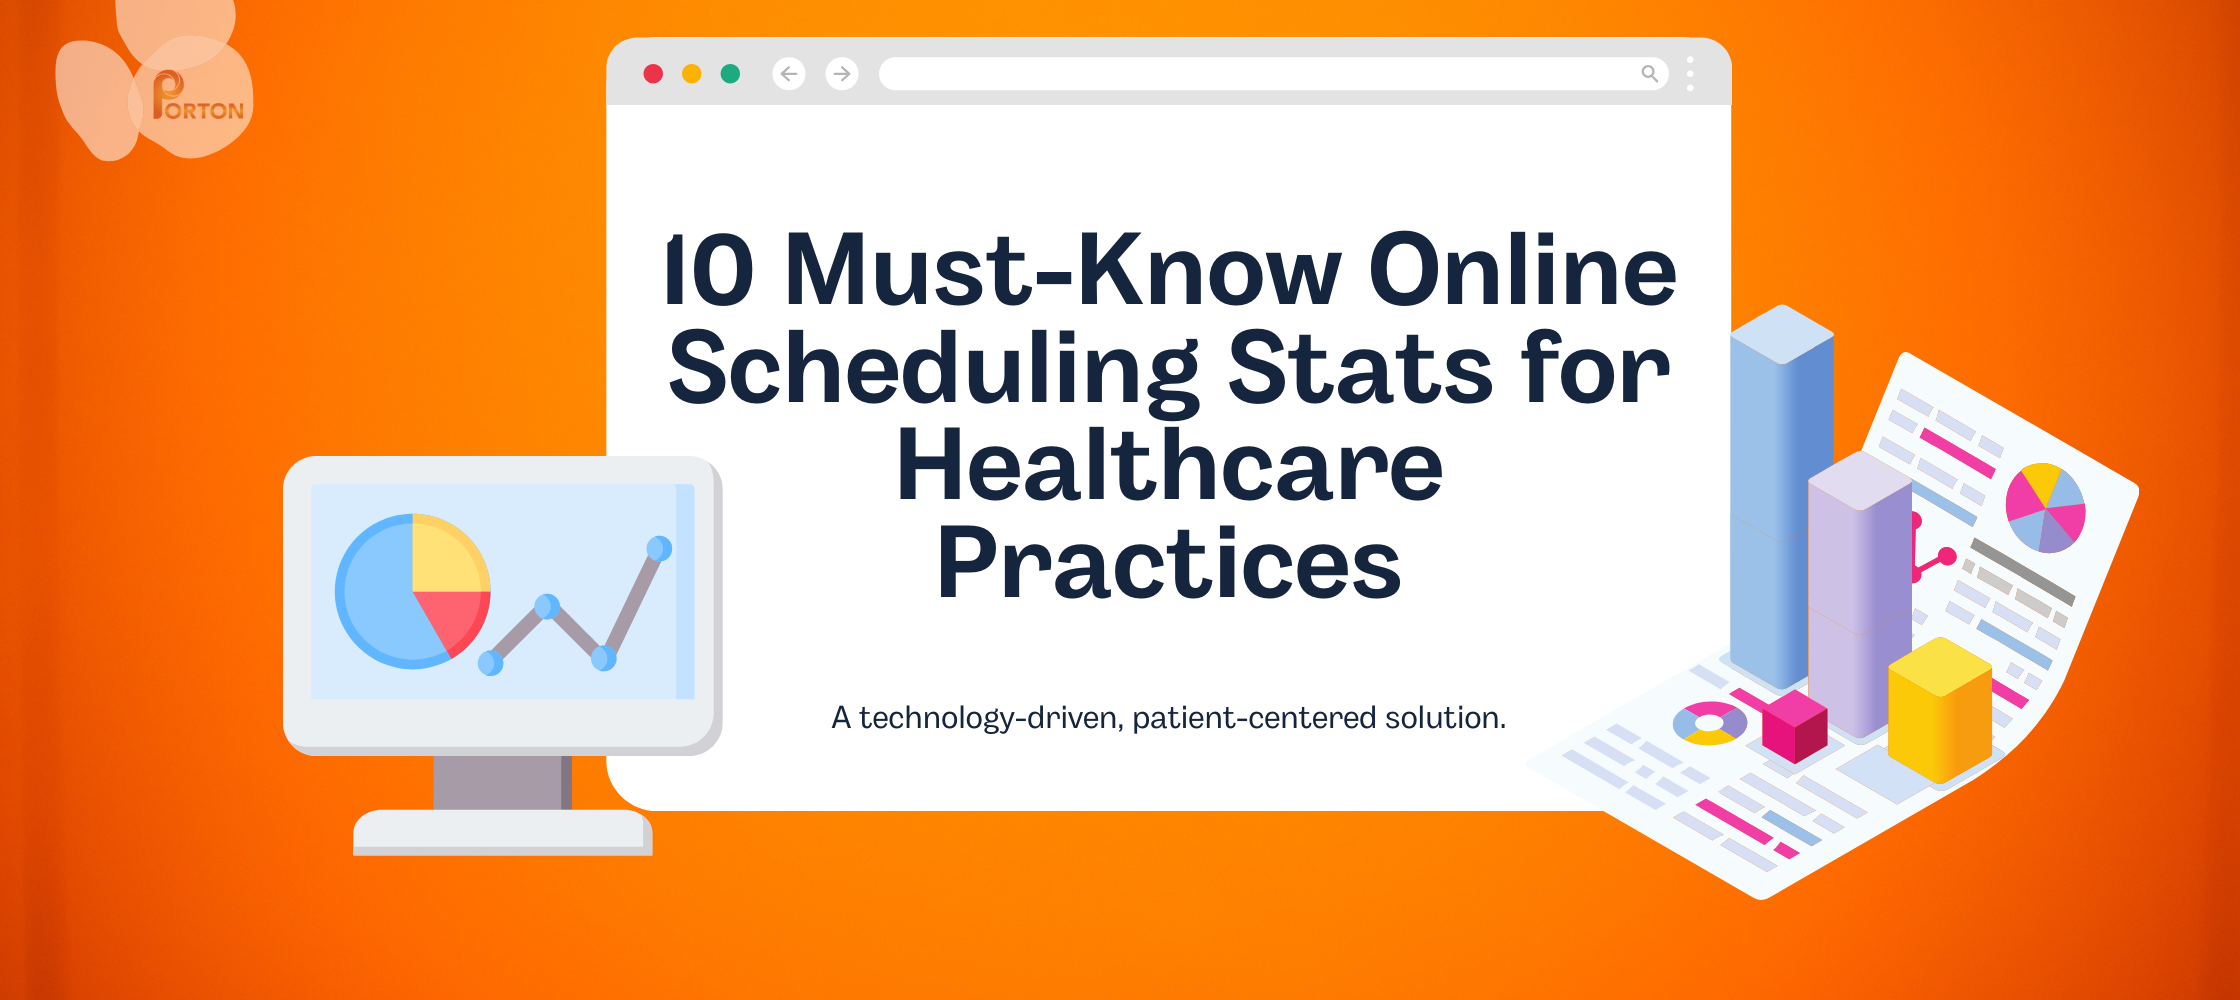 10 Must-Know Online Scheduling Stats for Healthcare Practices